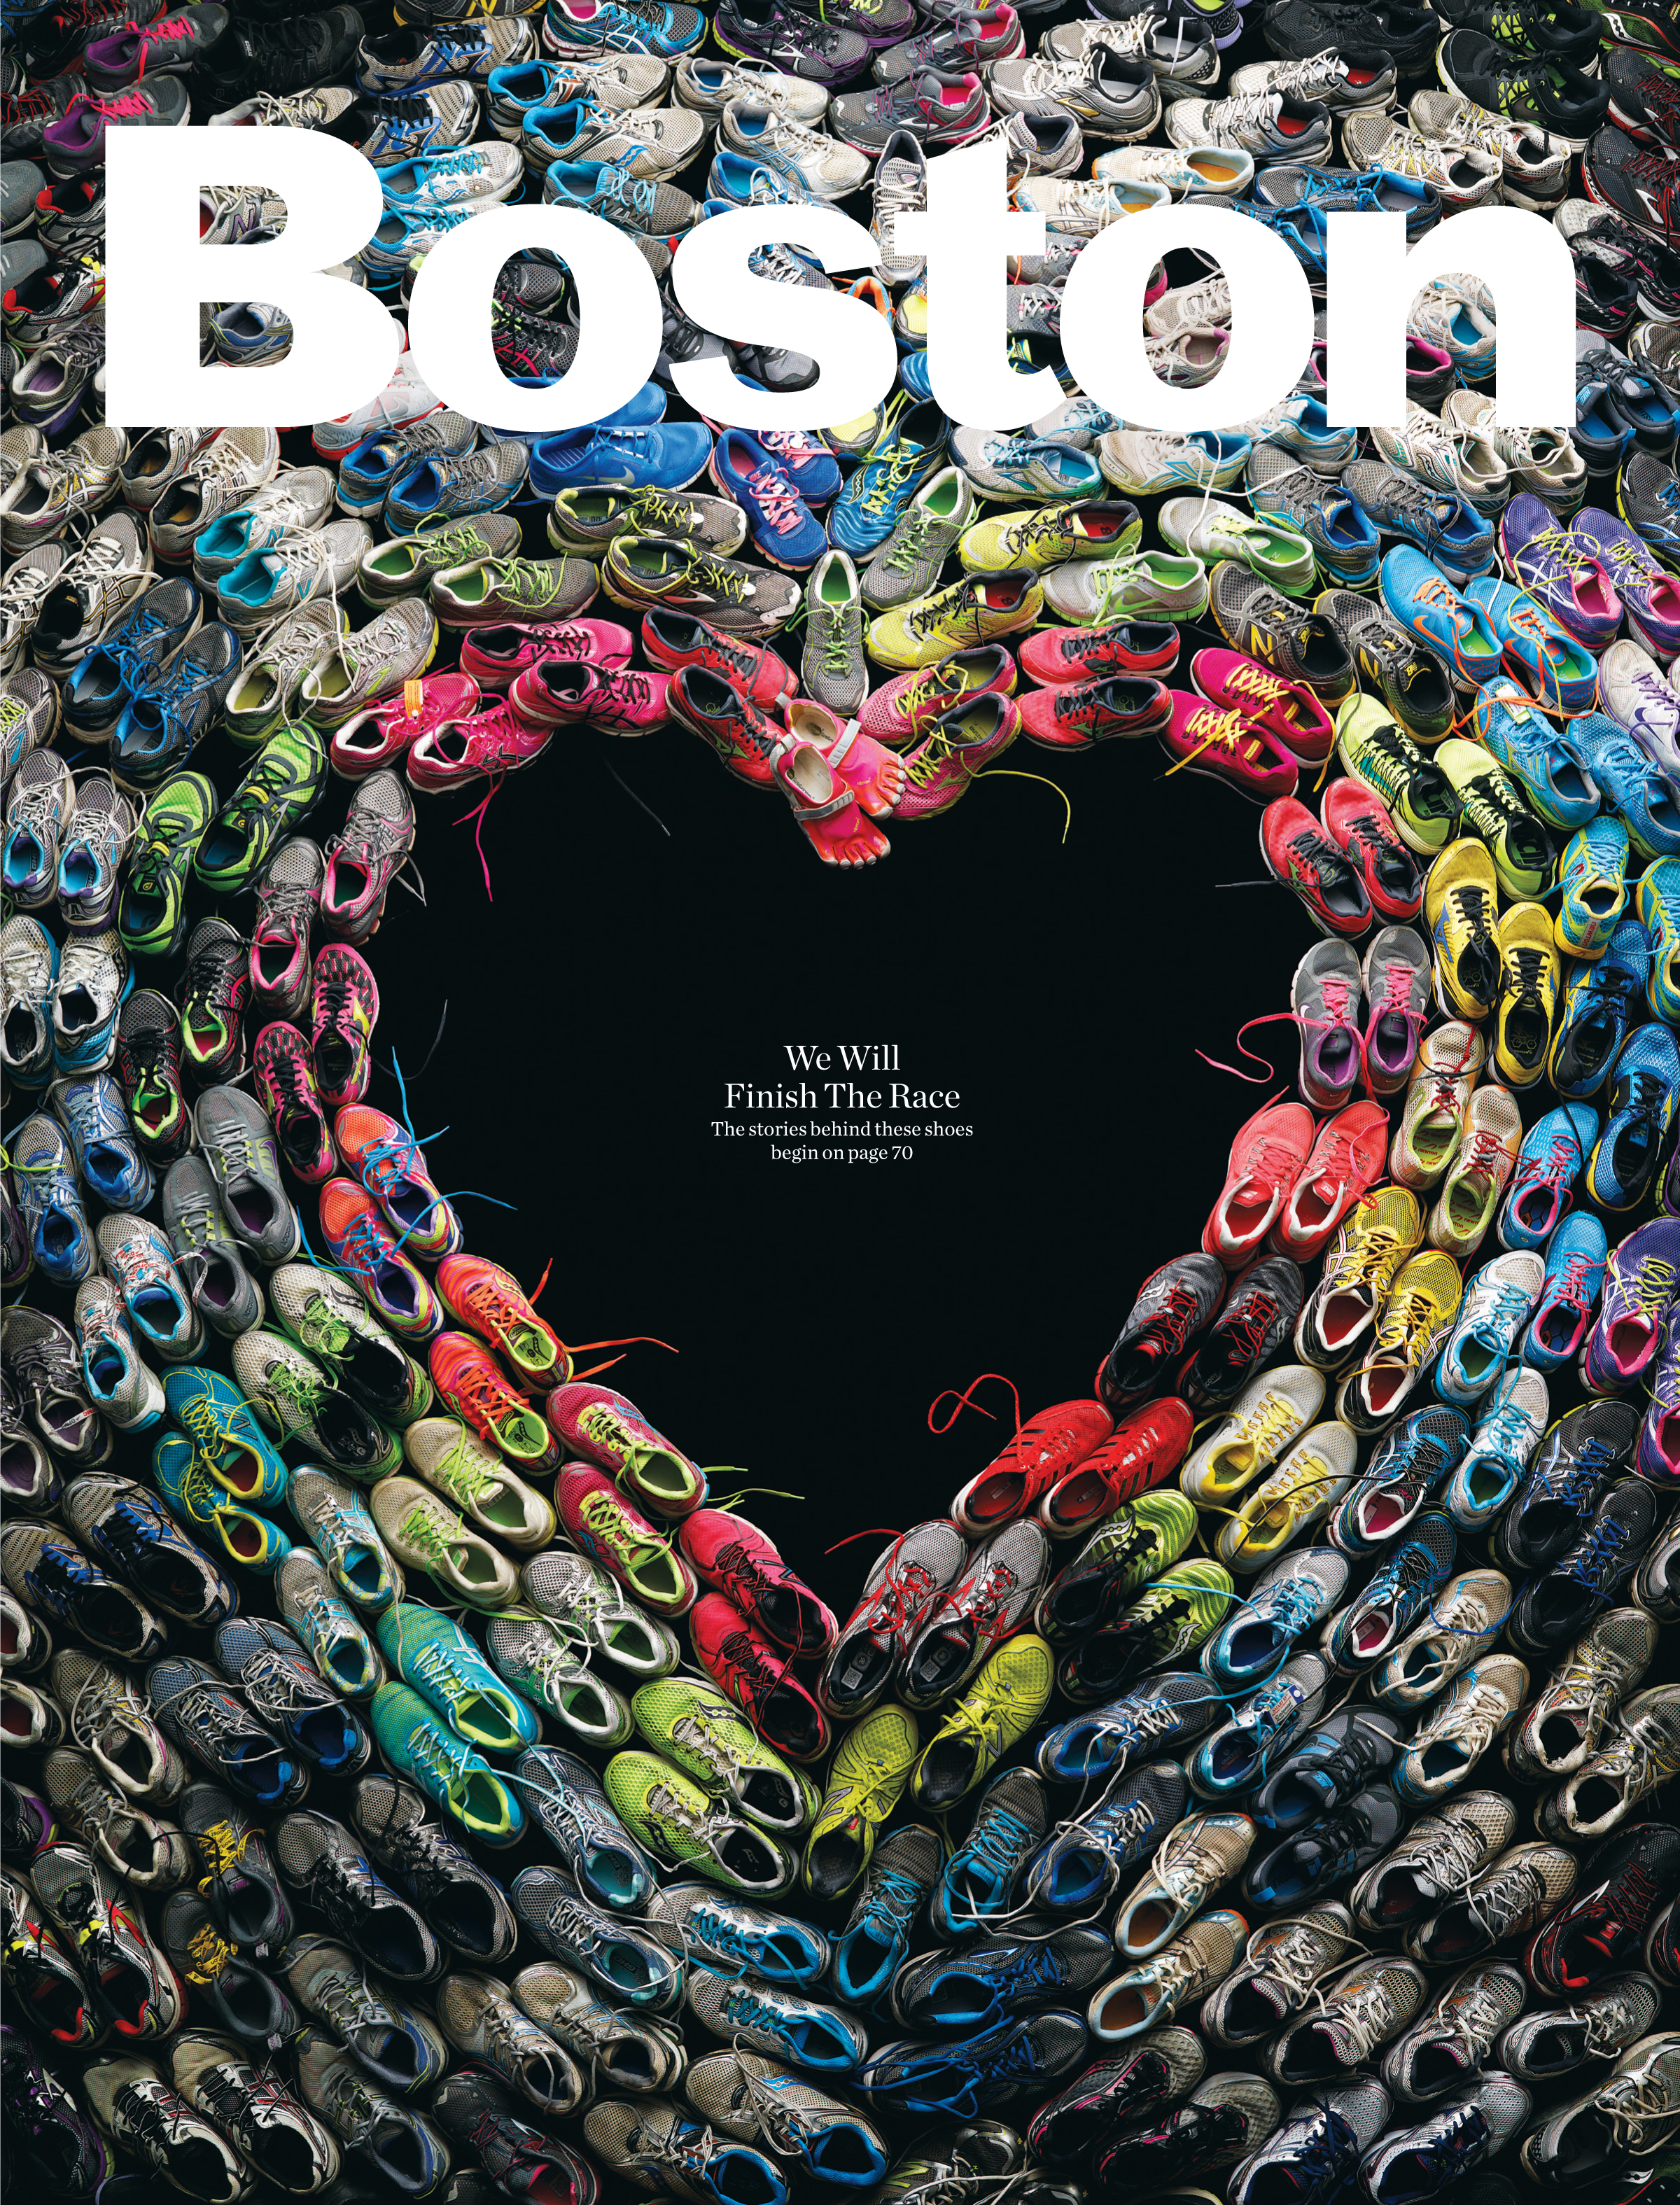 Boston - May, "We Will Finish the Race"